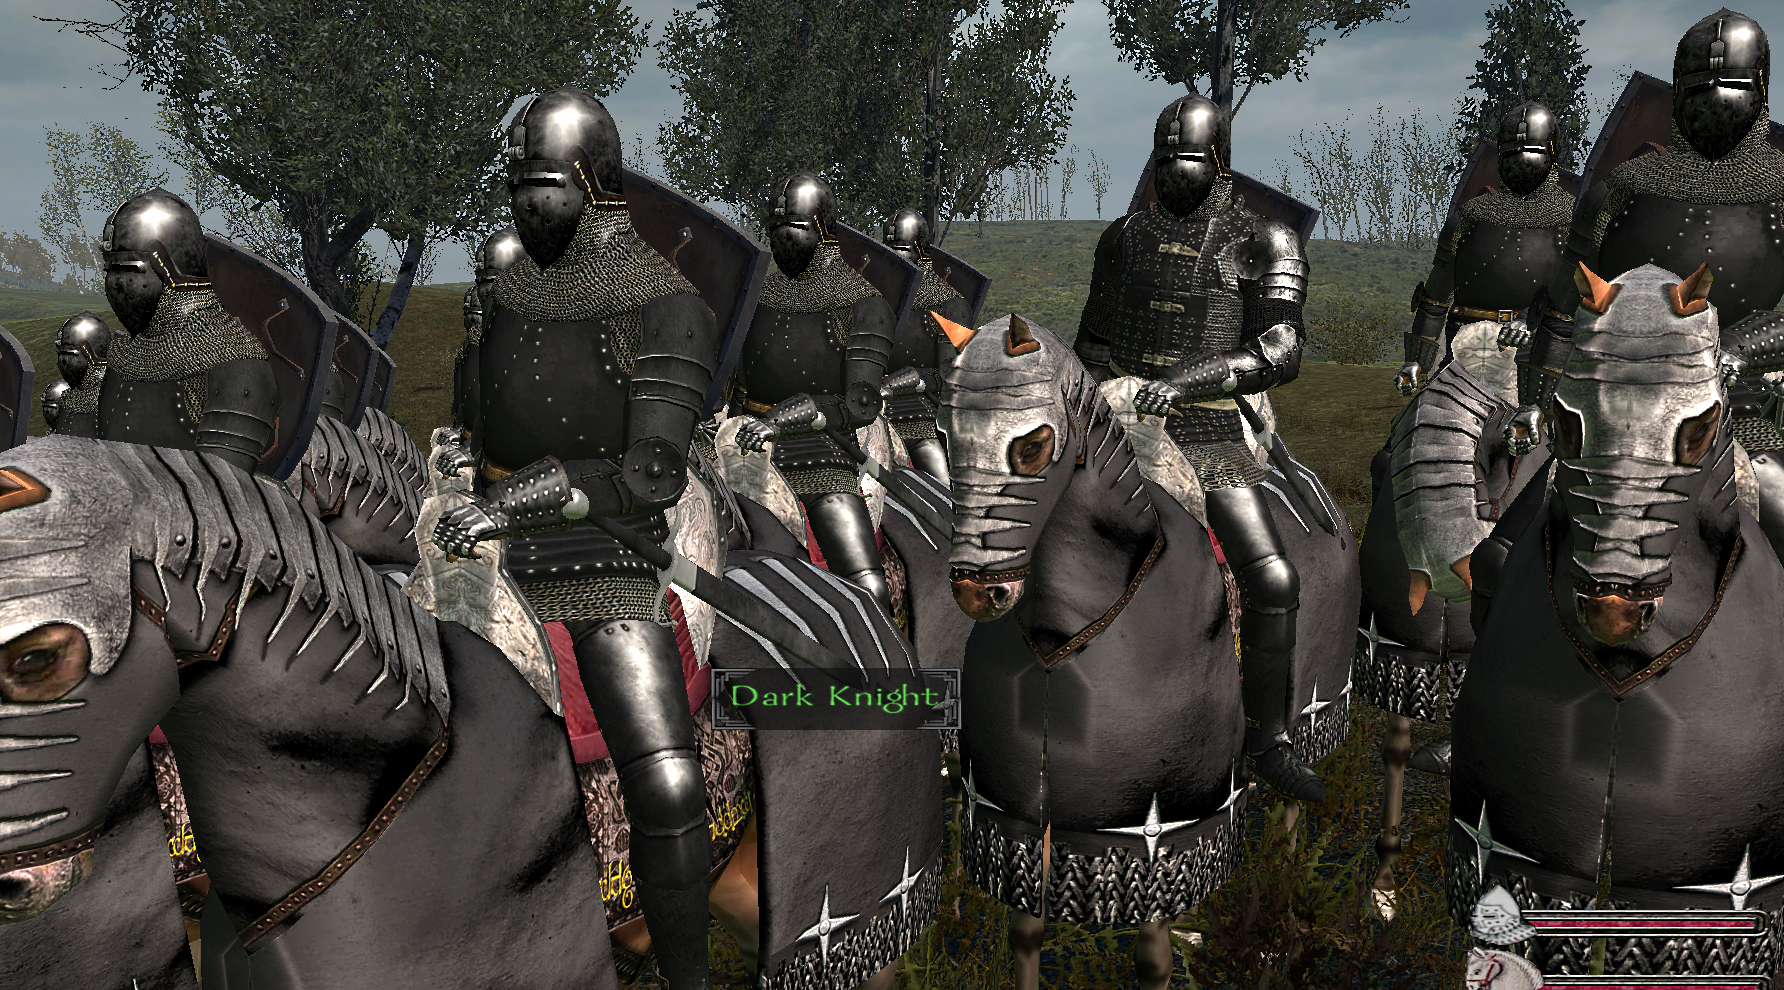 mount and blade viking conquest best armor